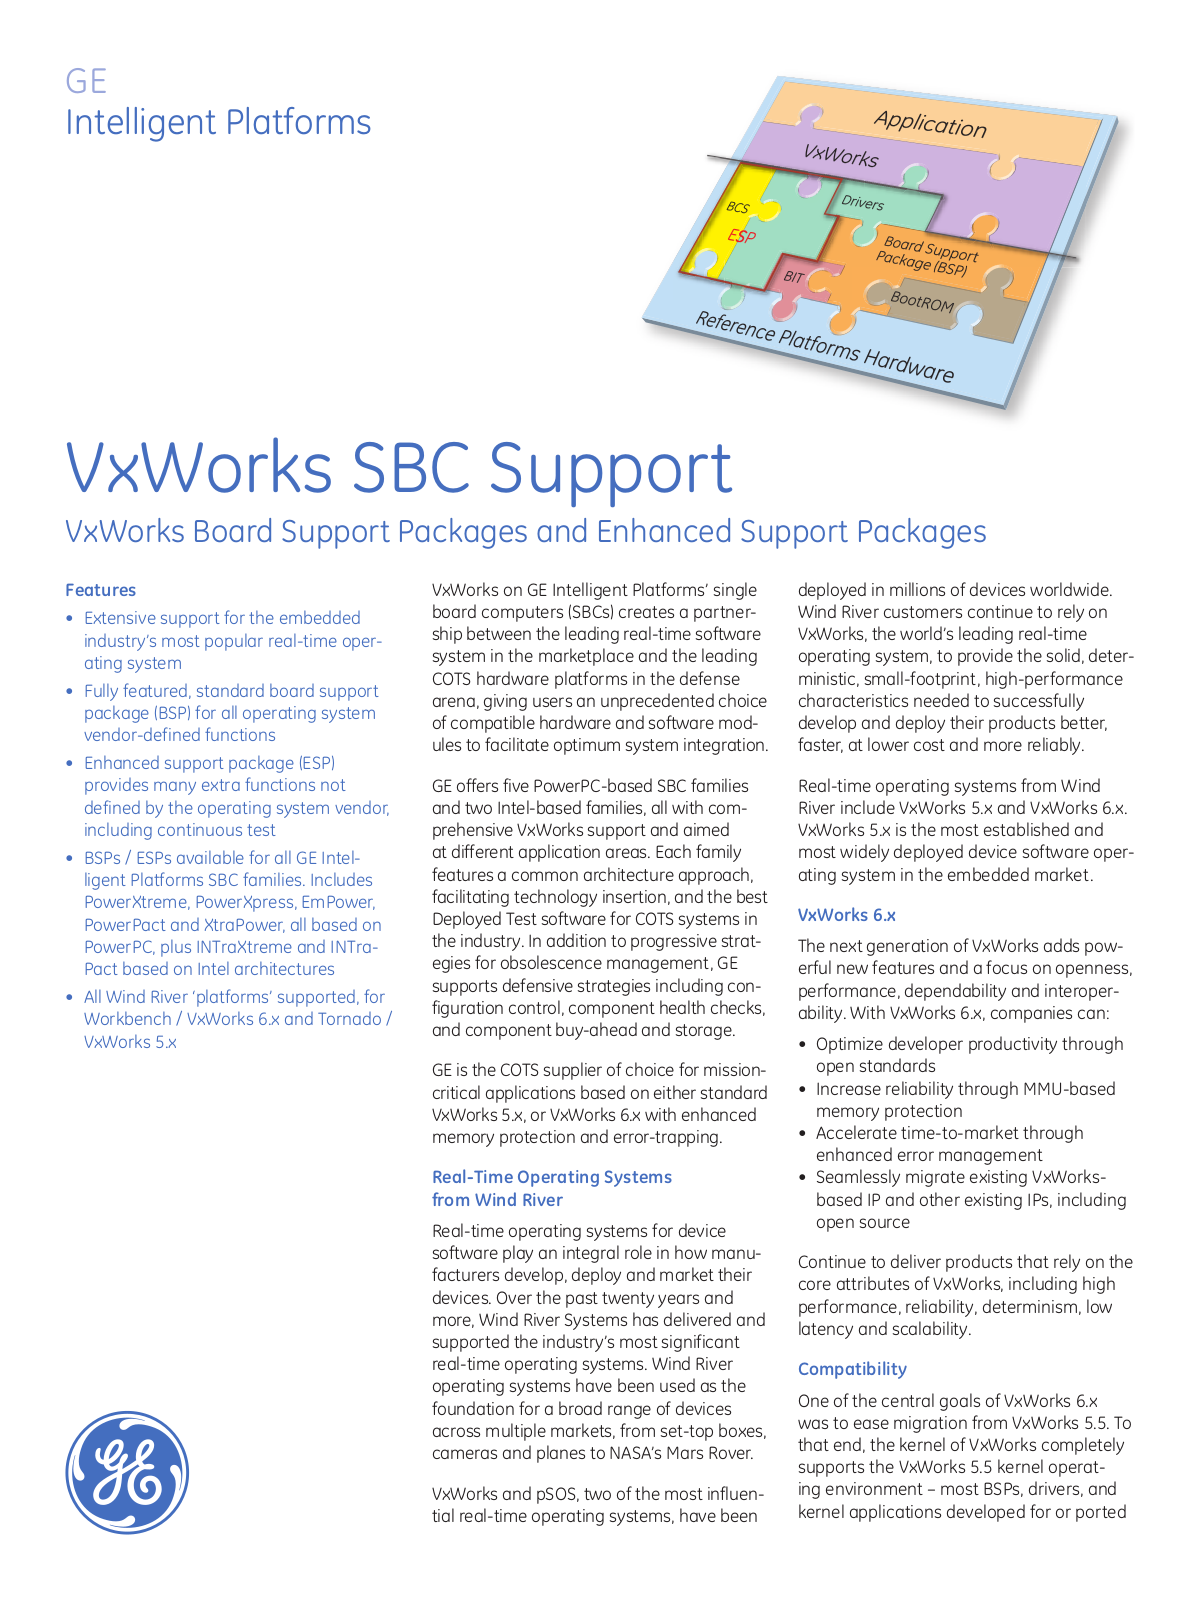 GE VxWorks SBC Support, PPC9A Data Sheet